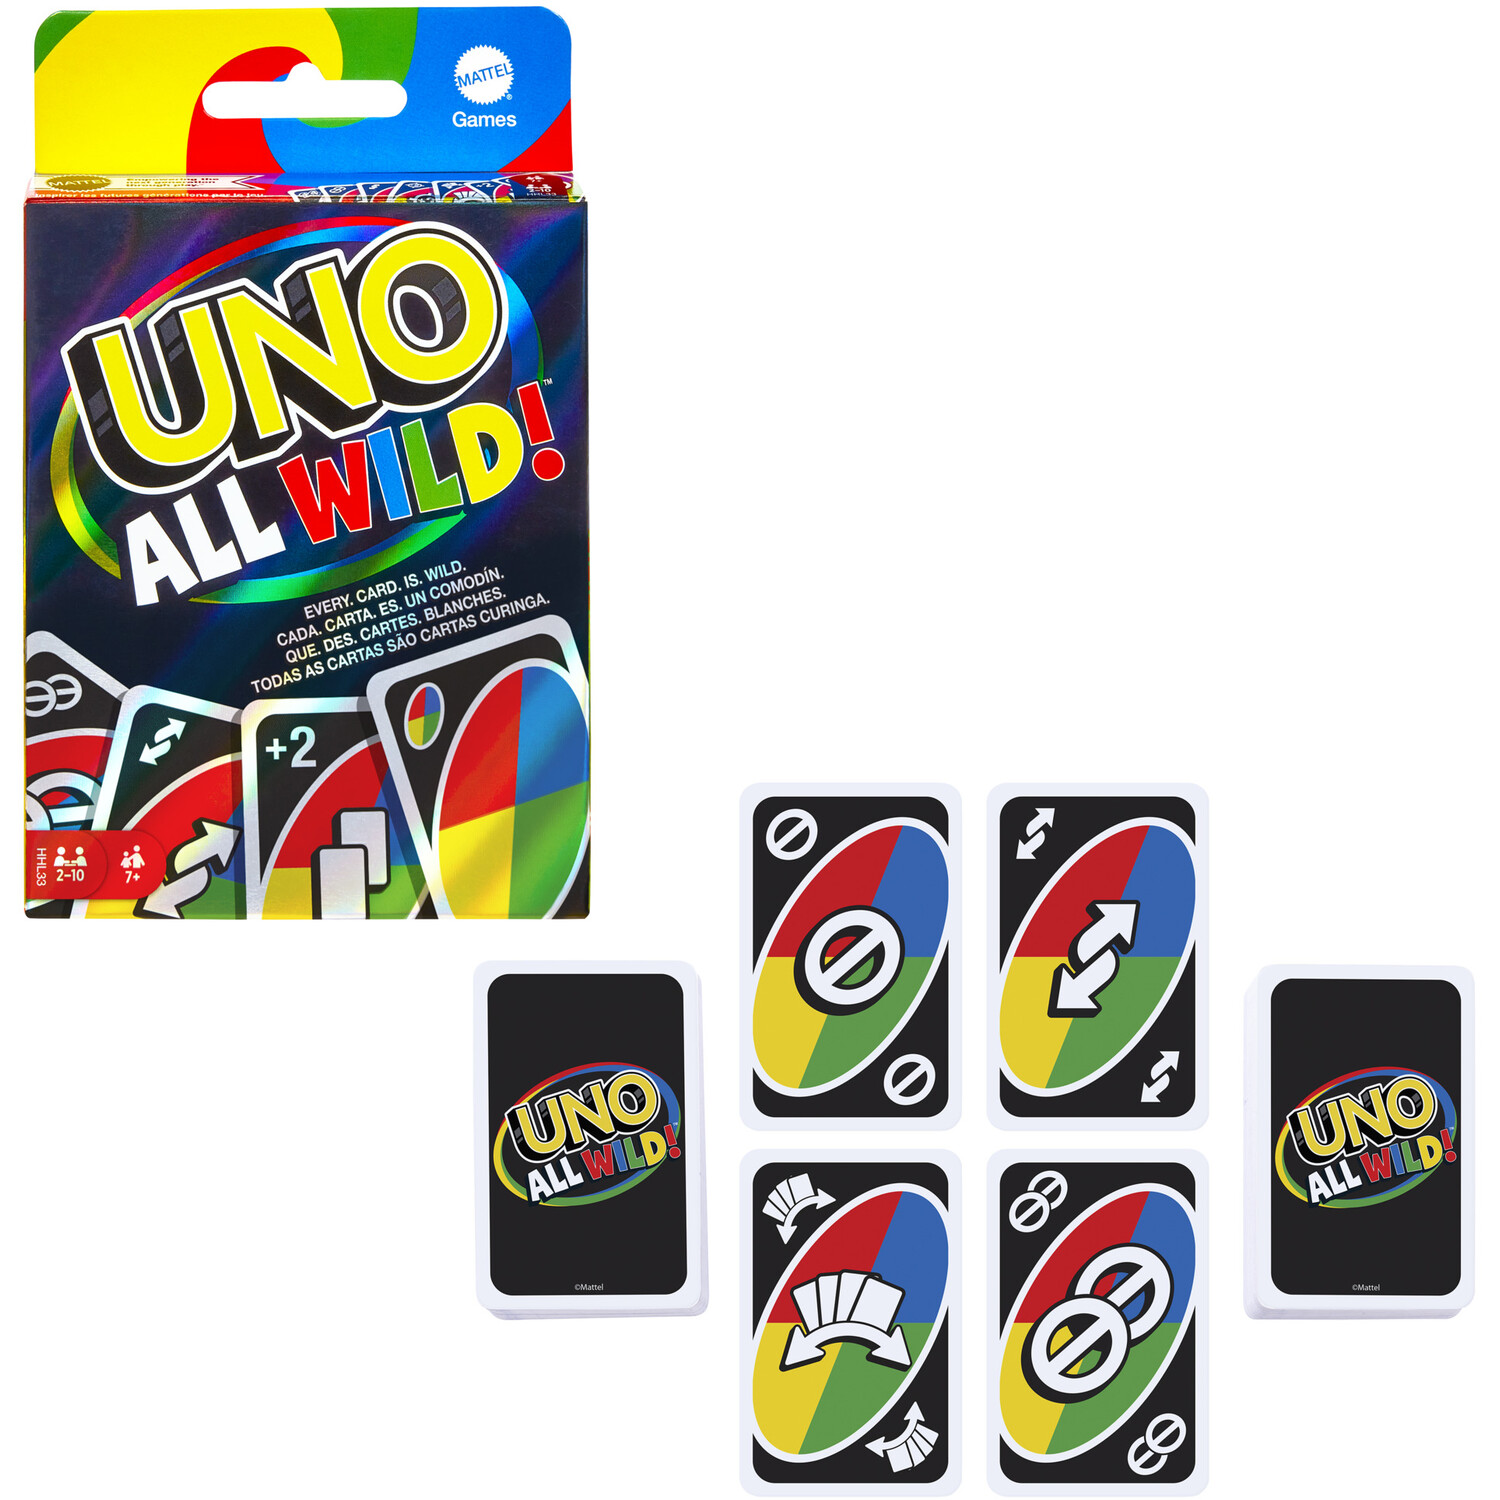 UNO All Wild Card Game Image 4